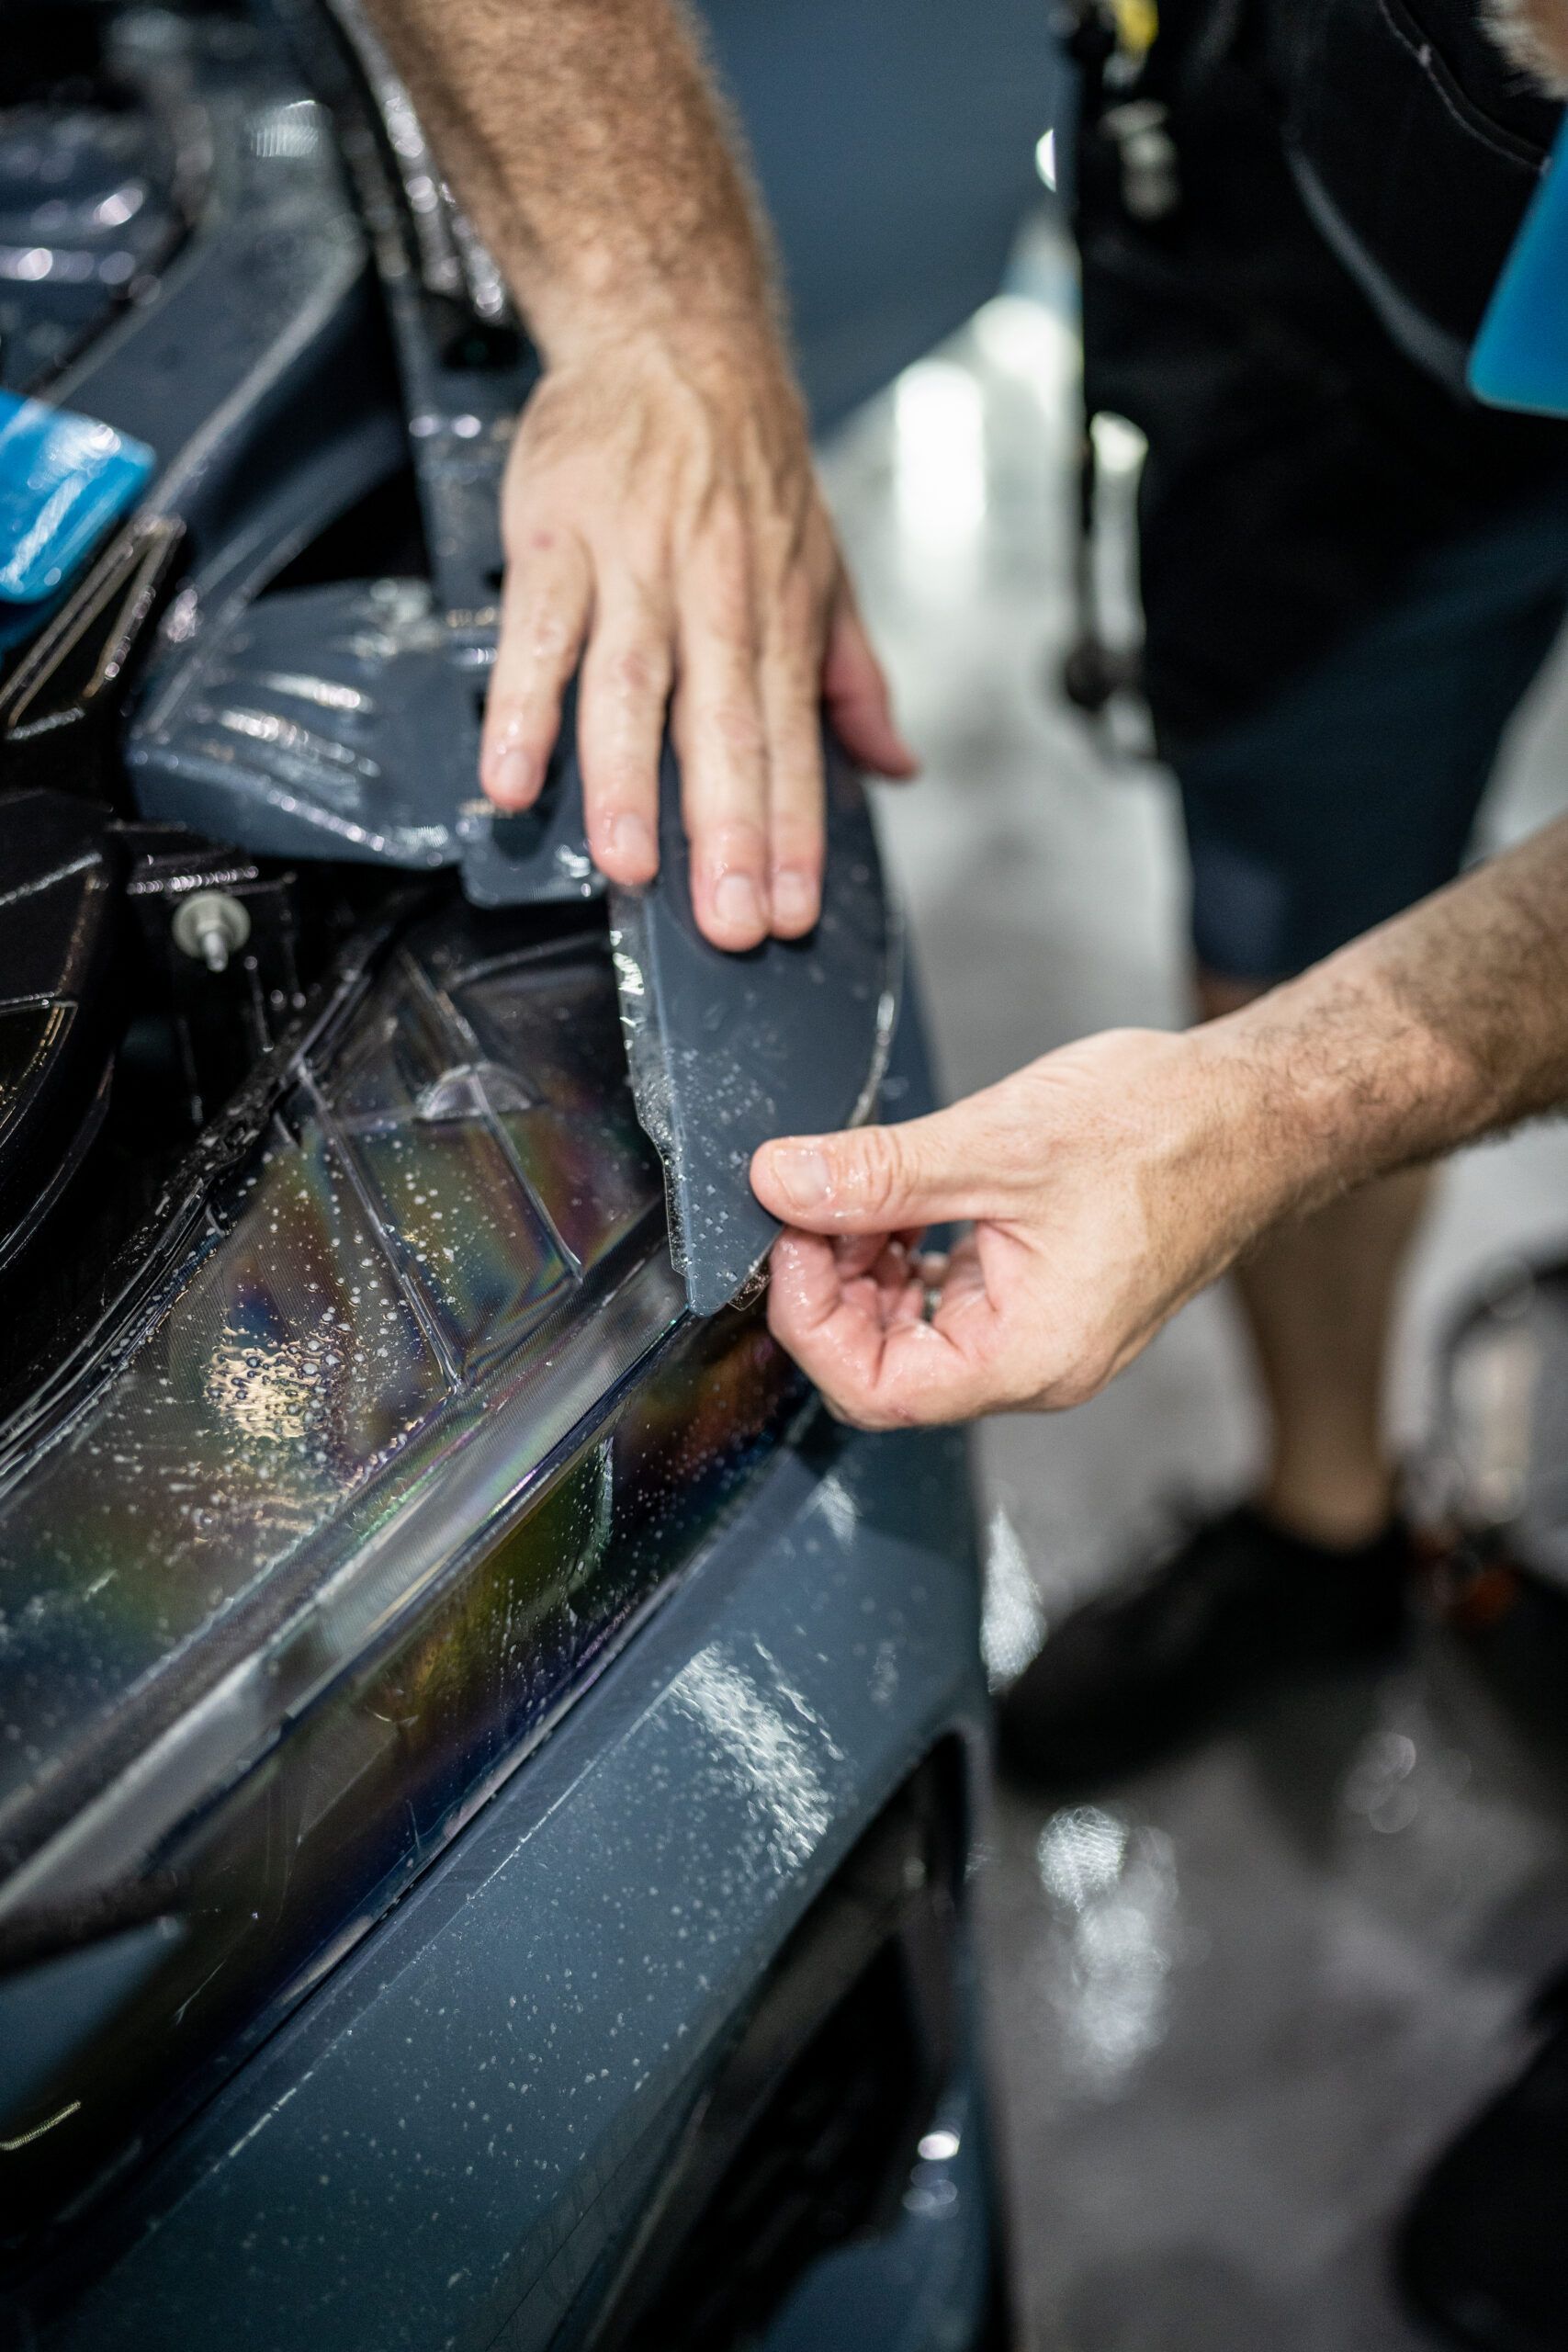 A man is applying a protective film to the headlight of a car.